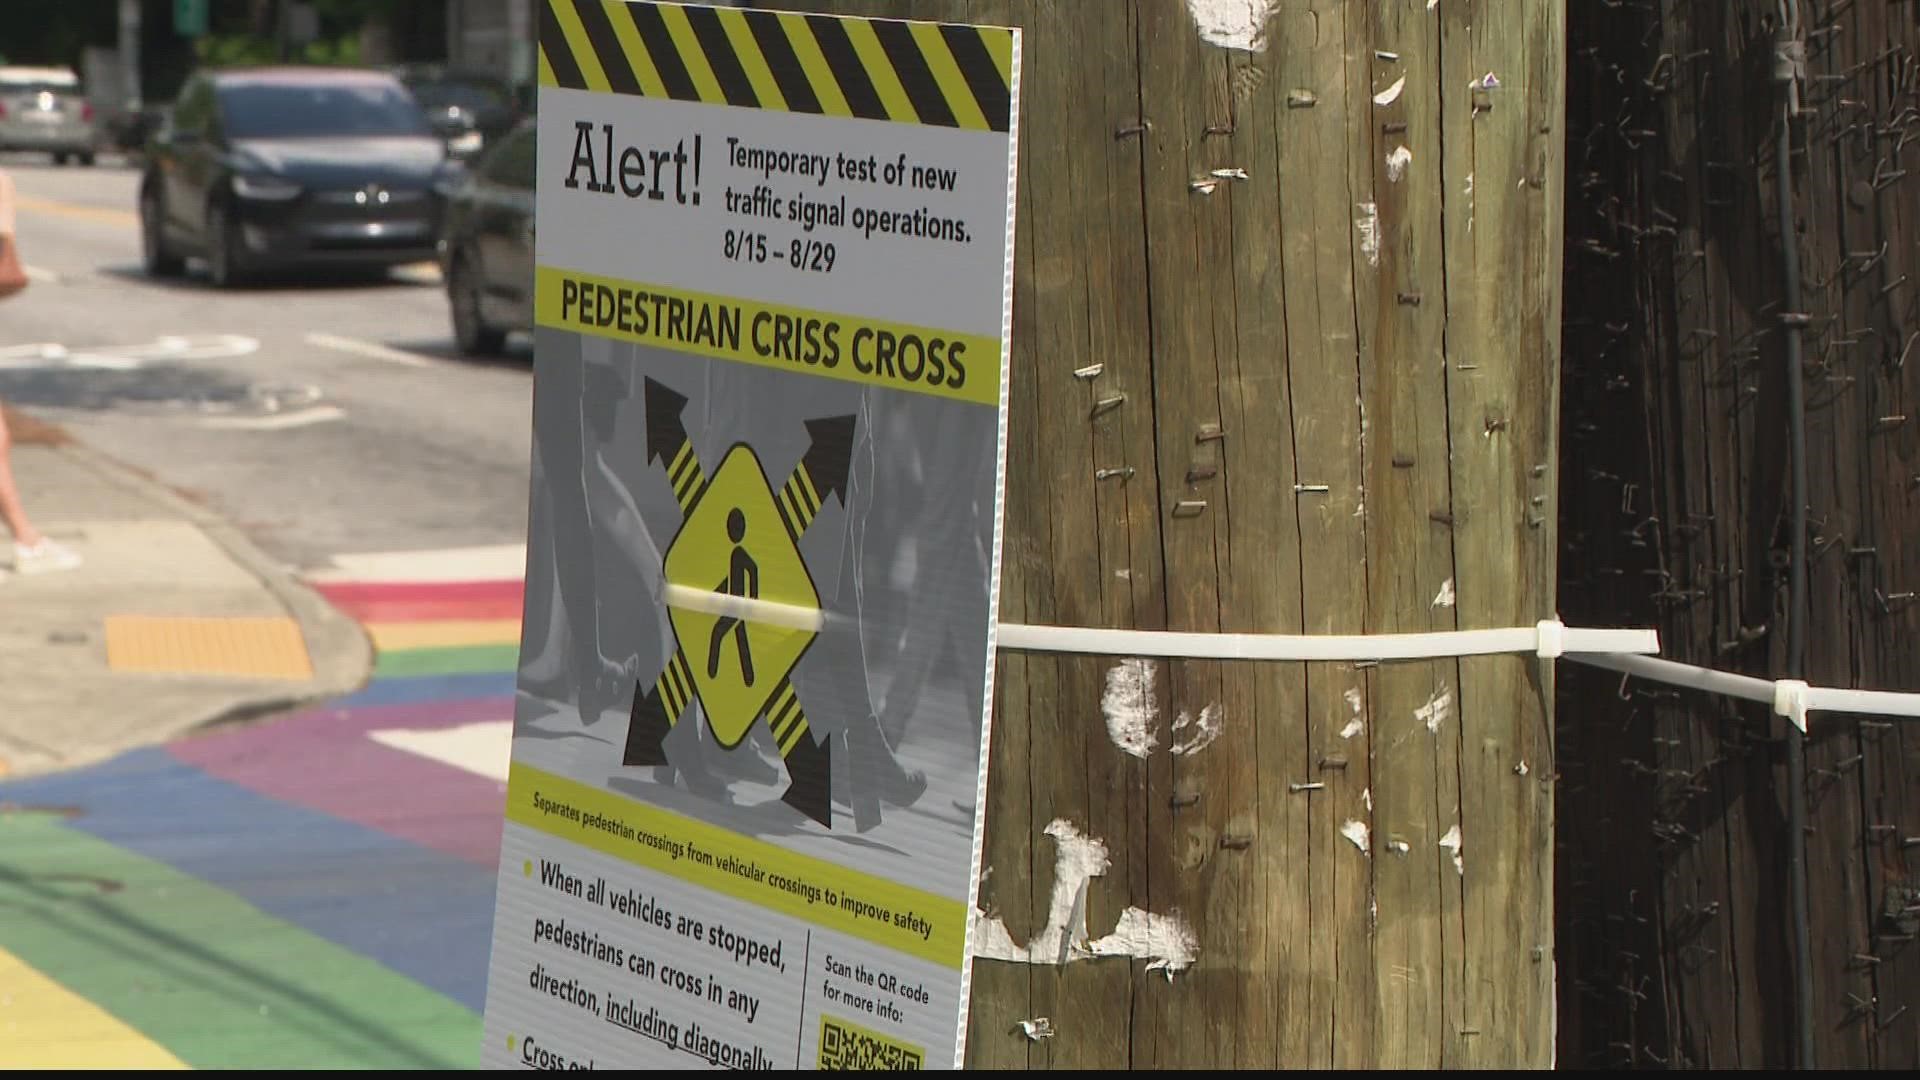 People can now walk from all corners at the same time on Midtown's rainbow crosswalk at 10th and Piedmont Avenue.